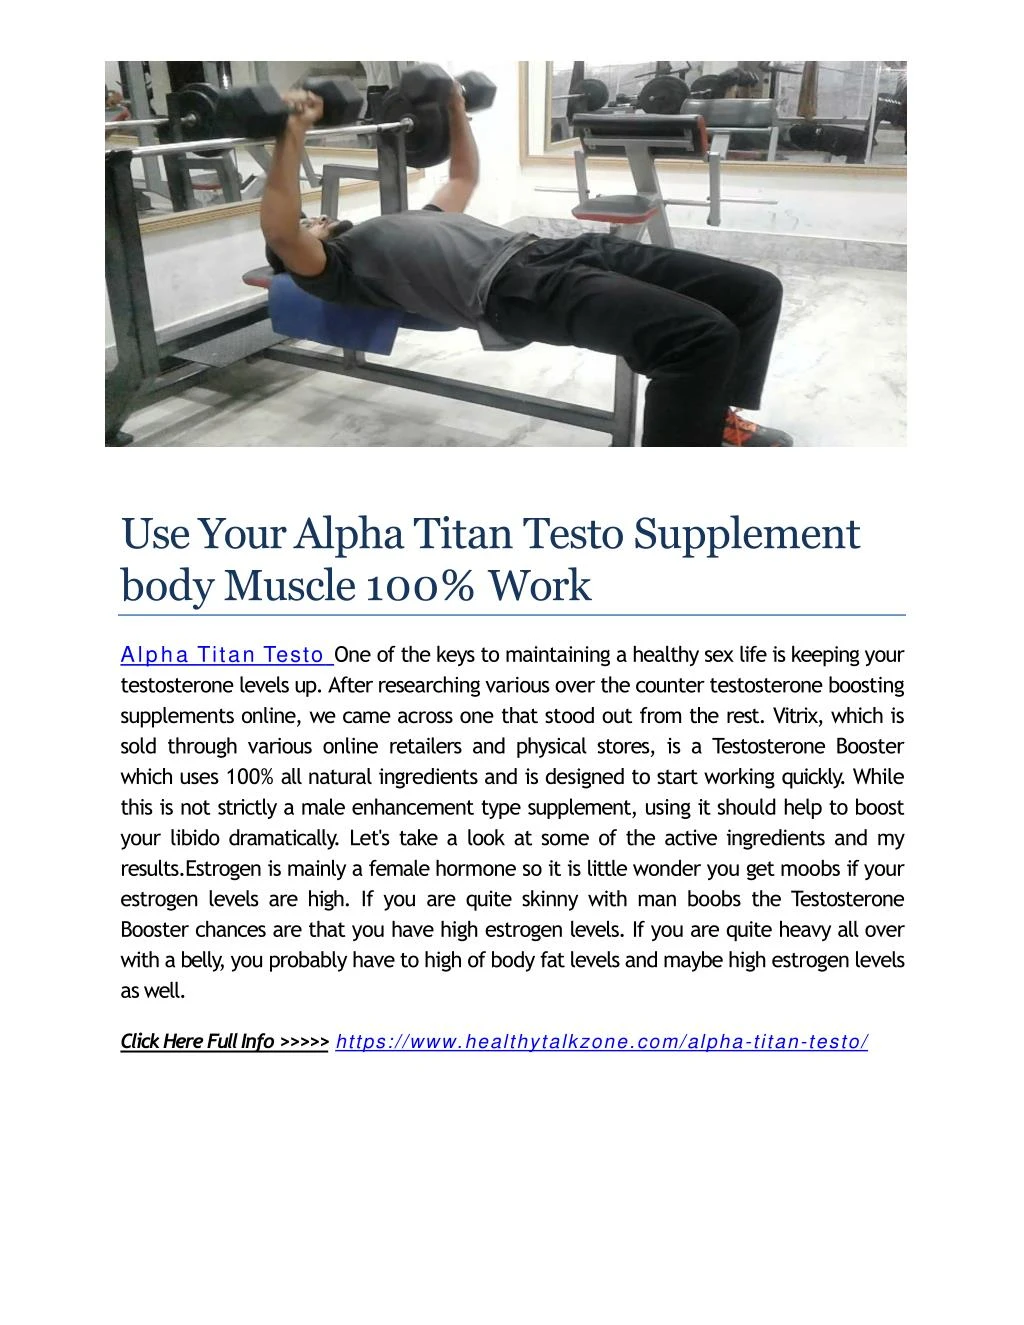 use your alpha titan testo supplement body muscle 100 work